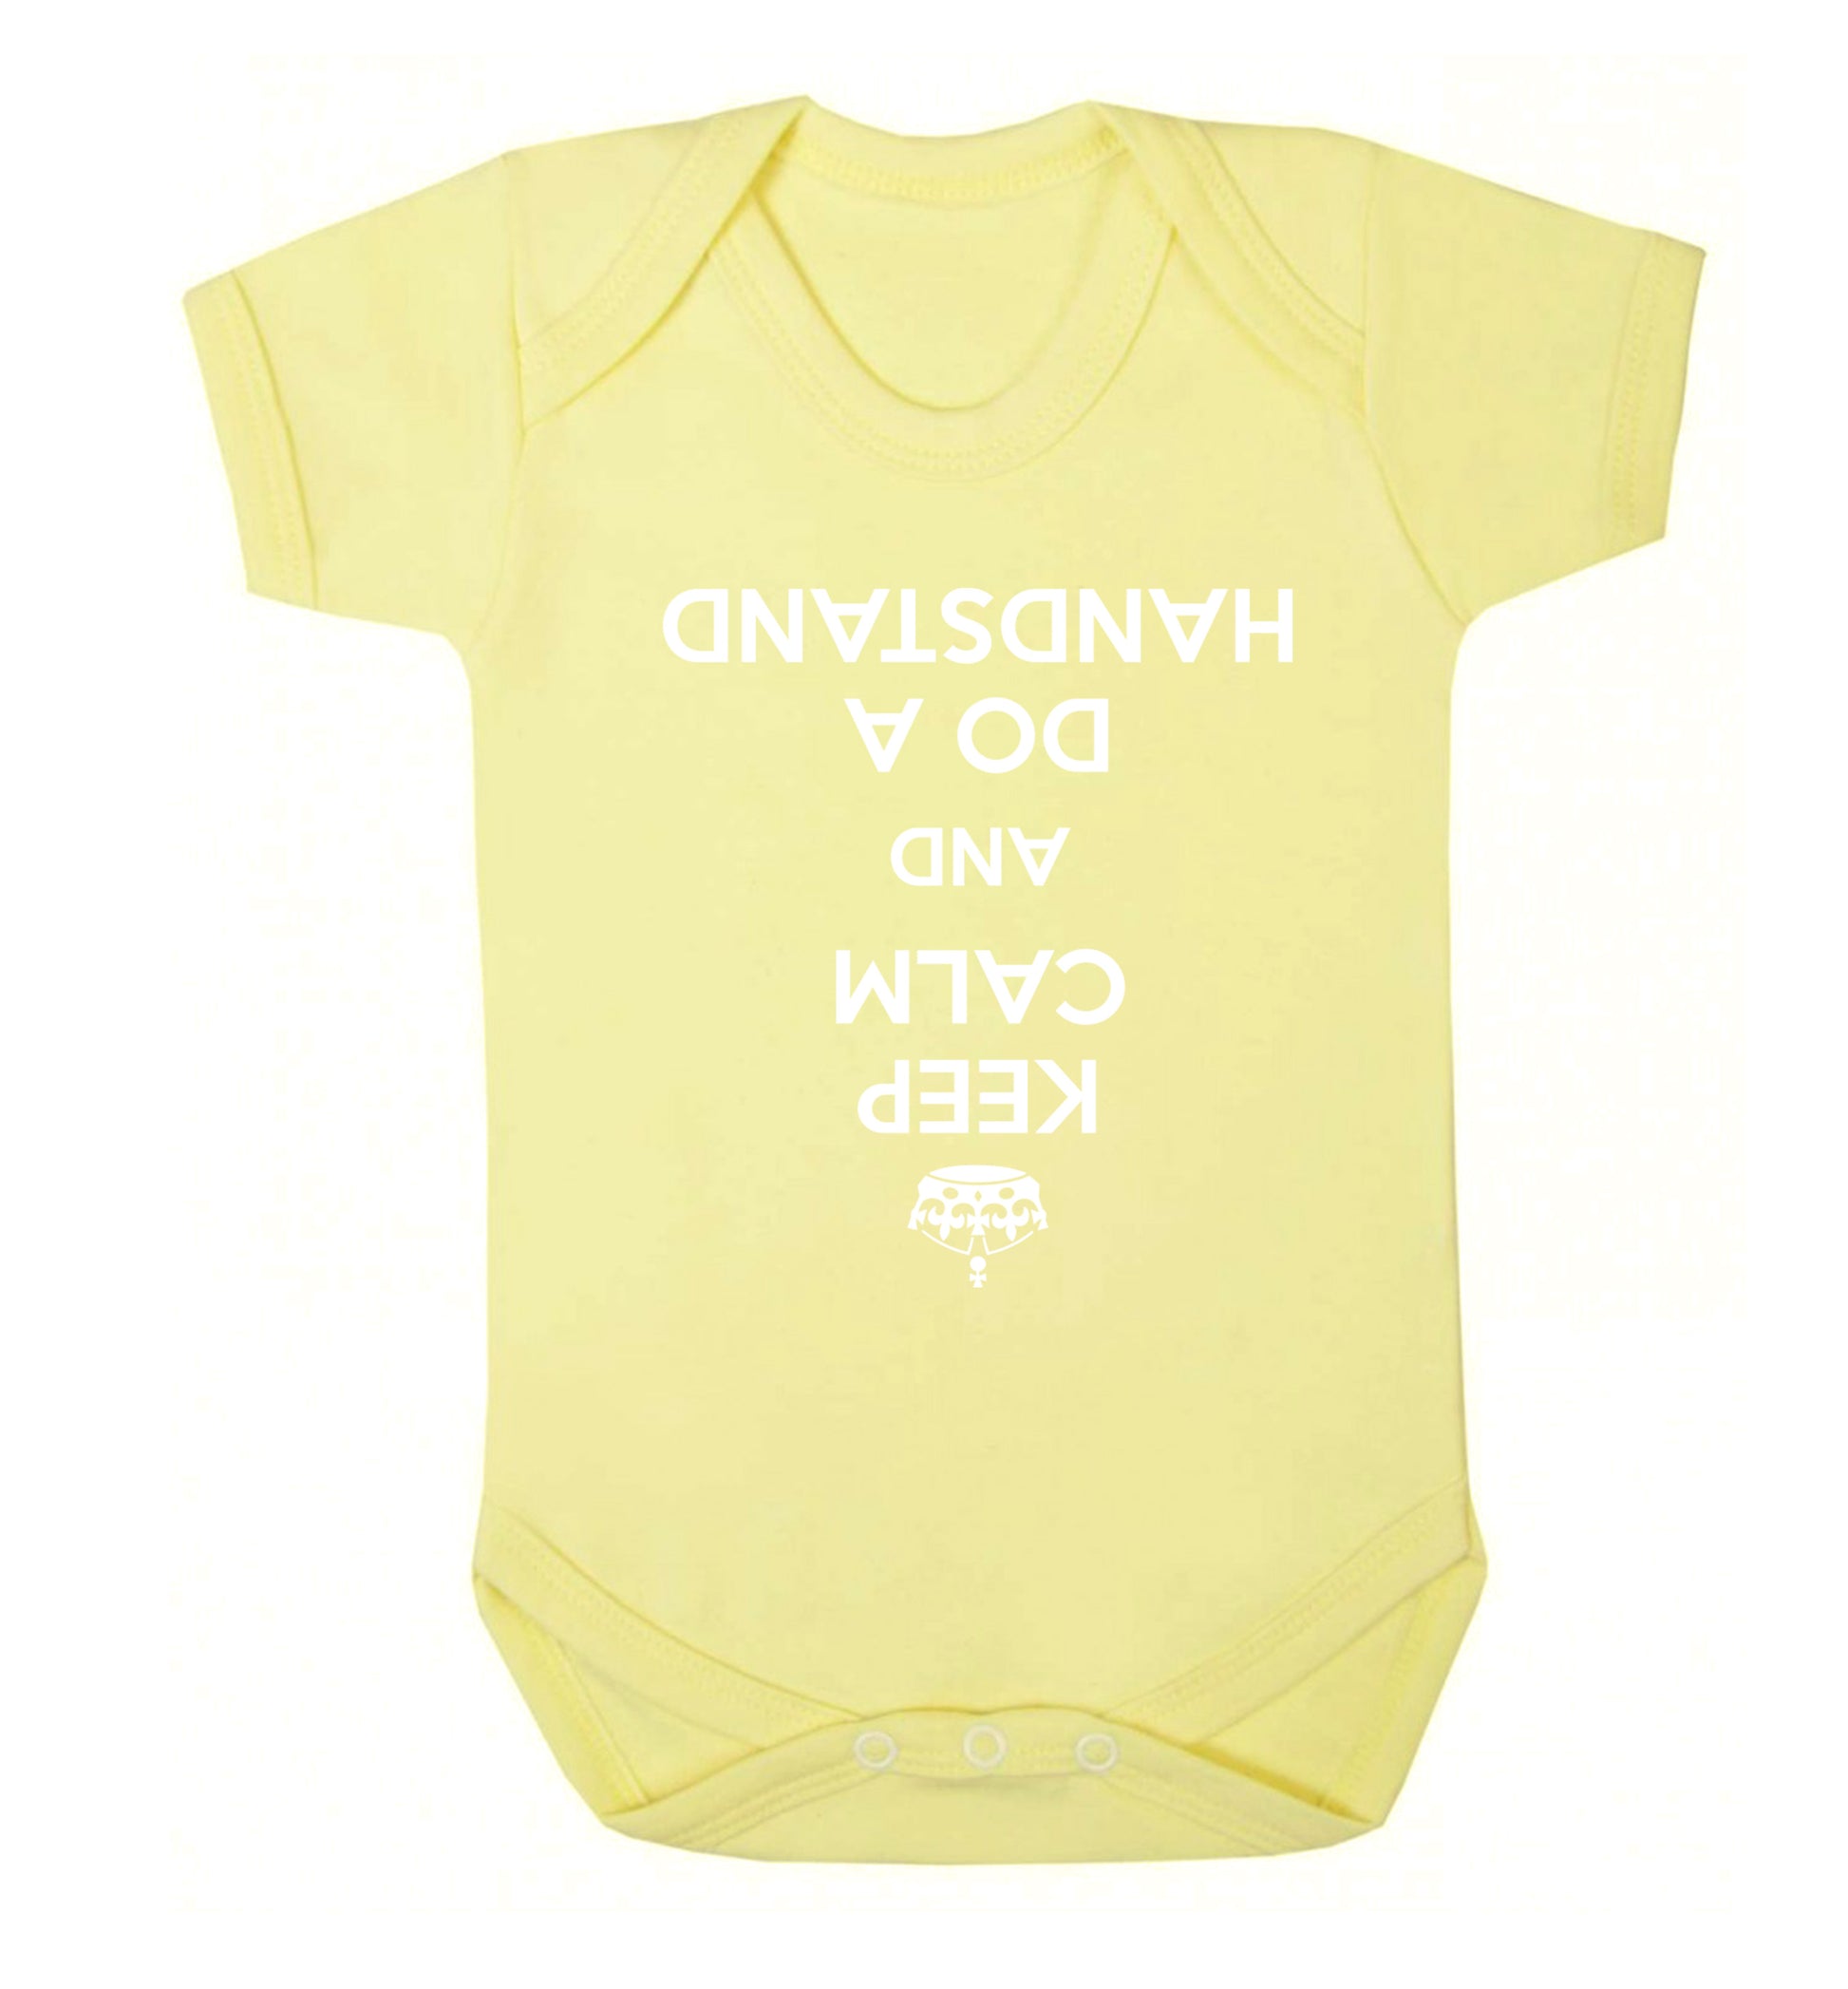 Keep calm and do a handstand Baby Vest pale yellow 18-24 months